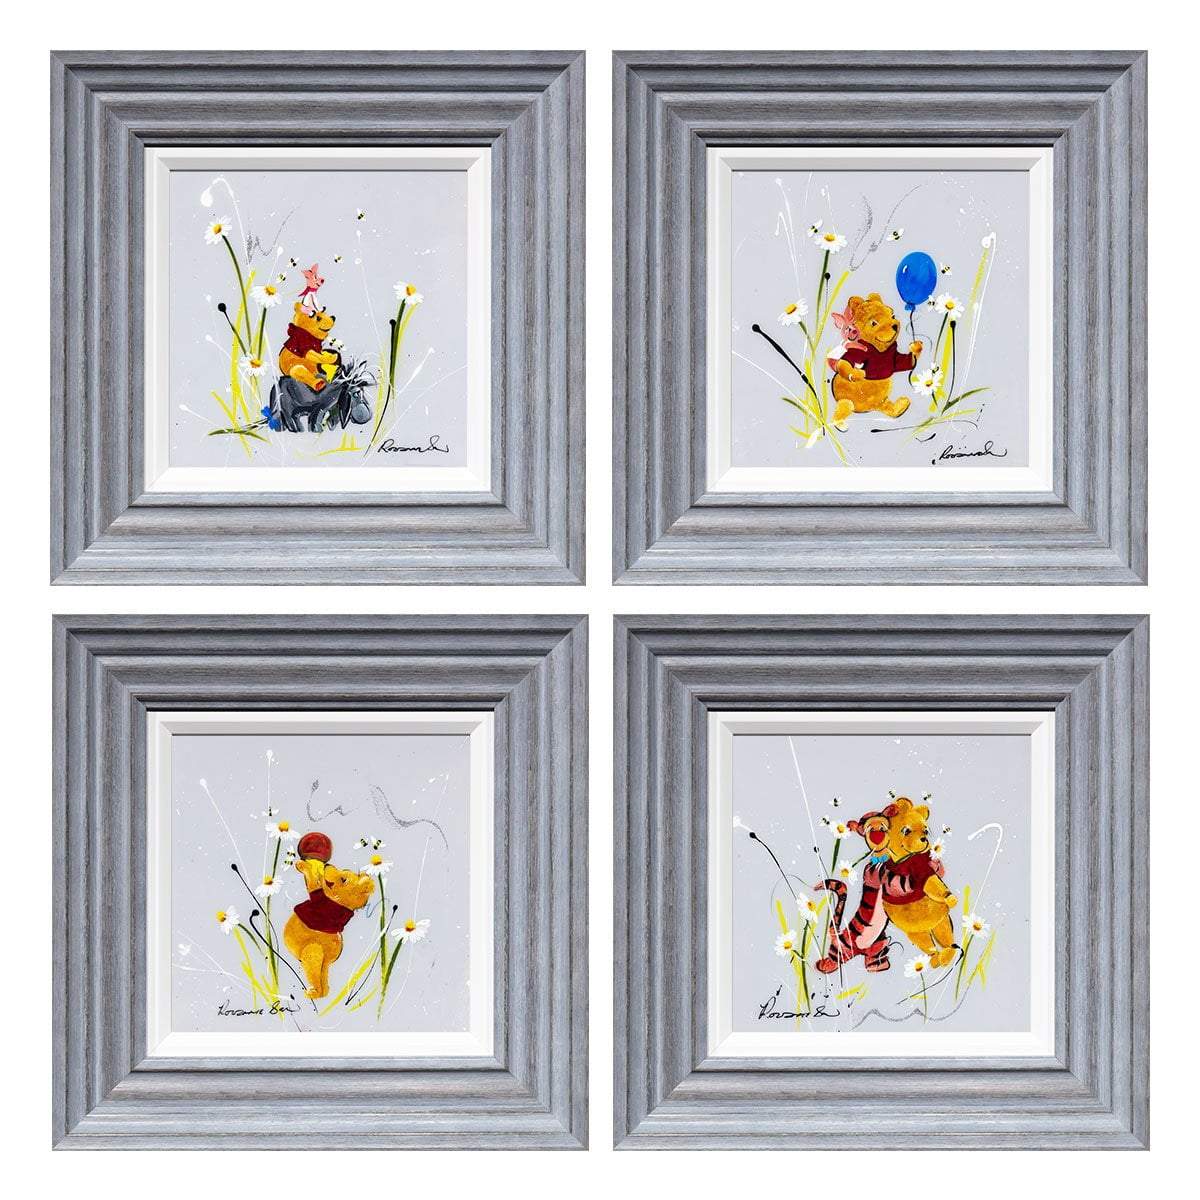 We Will Be Friends Until Forever - Original Set of 4 Rozanne Bell